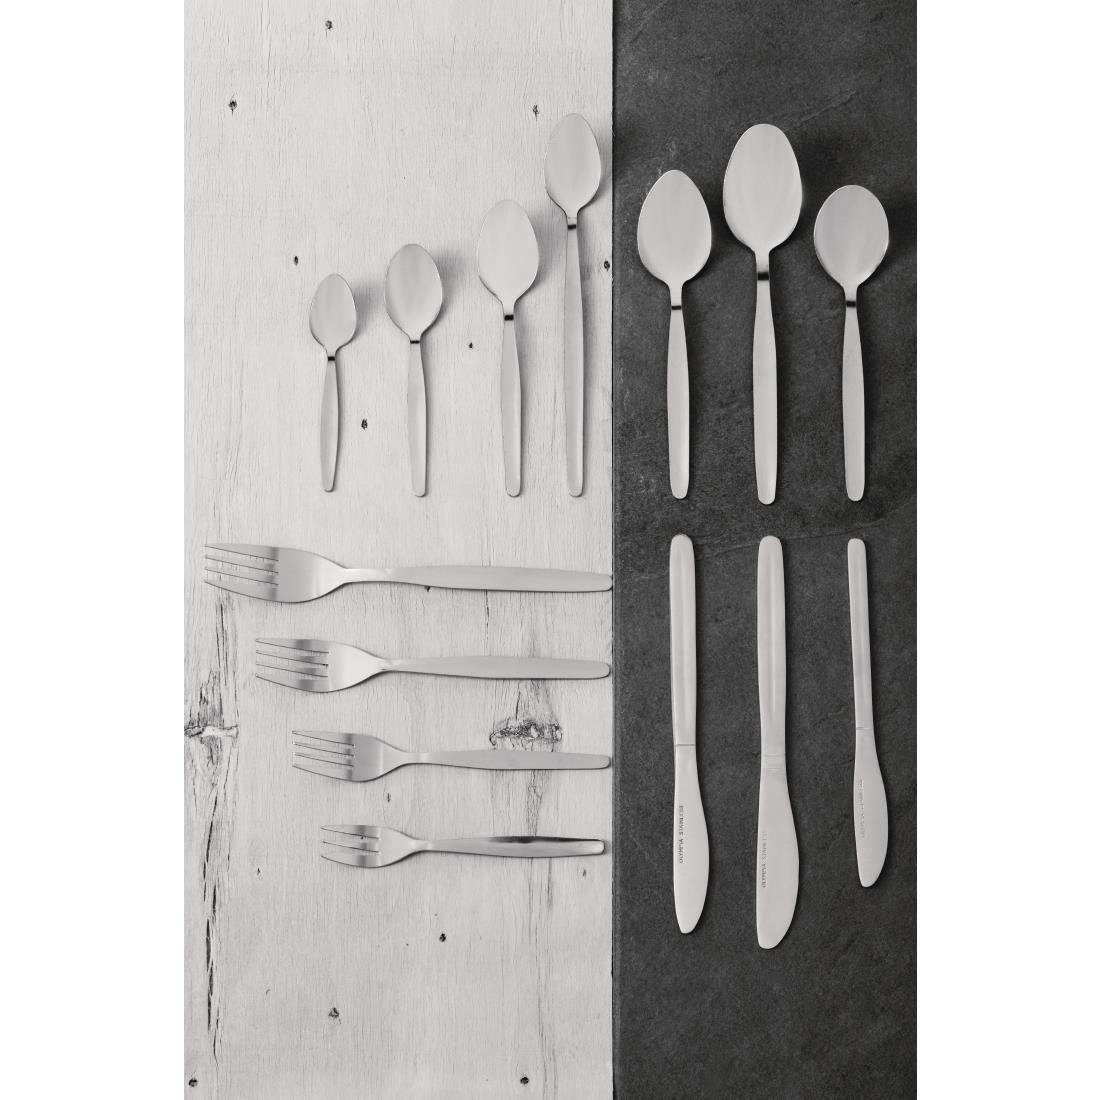 CB064 Olympia Kelso Childrens Fork (Pack of 12) JD Catering Equipment Solutions Ltd